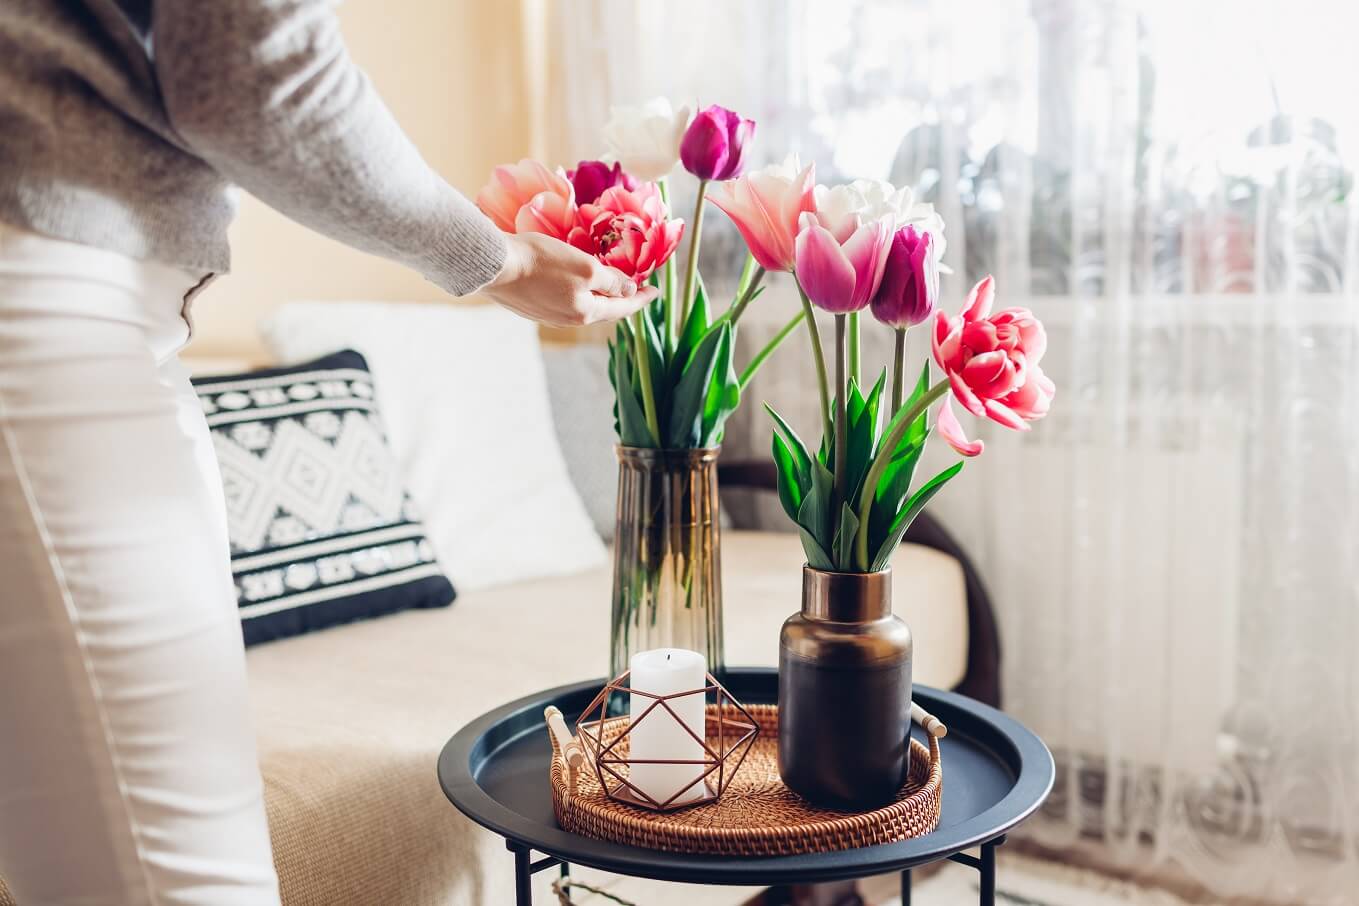 Beautify your home with plants and flowers